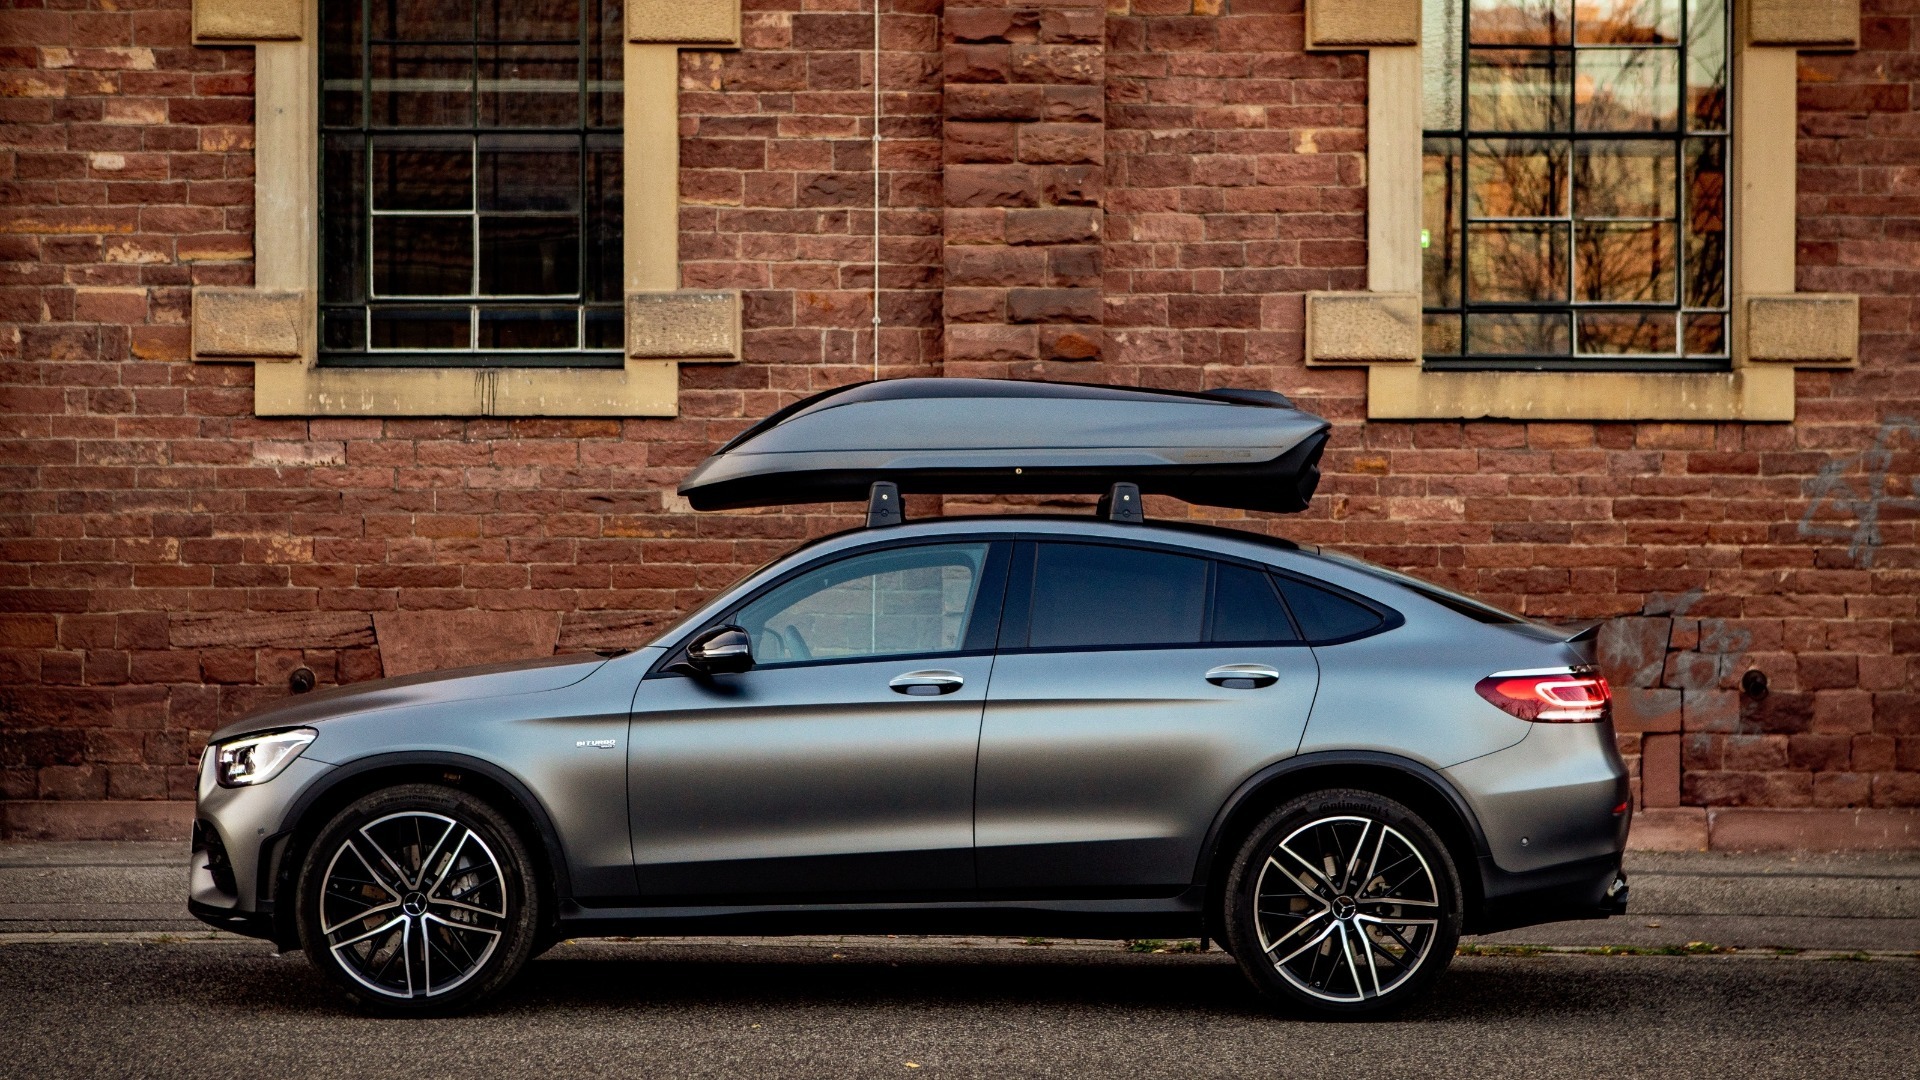 Mercedes-Benz on X: Built for all kinds of adventure – the Mercedes-AMG  roof box. Click on the link and travel in style! 👉   Via @MercedesAMG #MercedesAMG #DrivingPerformance #AMG   / X